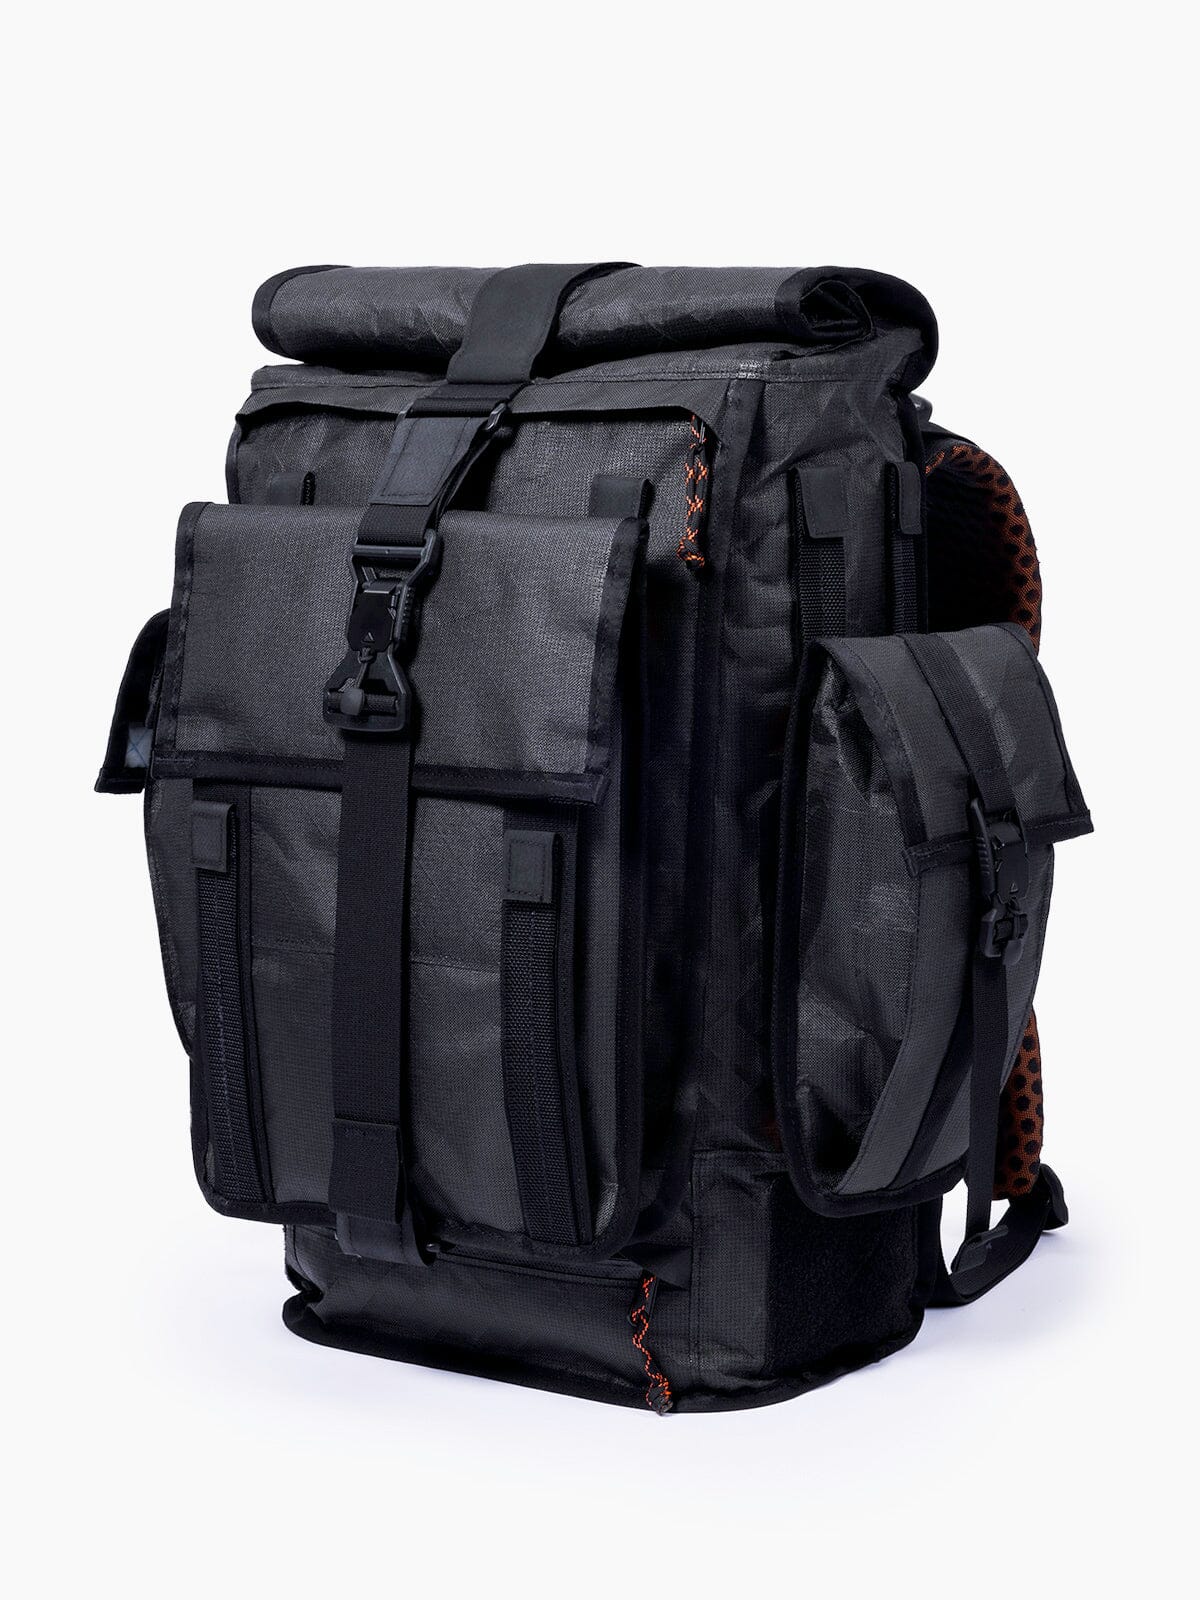 Mission Workshop X Carryology by Mission Workshop - Weatherproof Bags & Technical Apparel - San Francisco & Los Angeles - Built to endure - Guaranteed forever